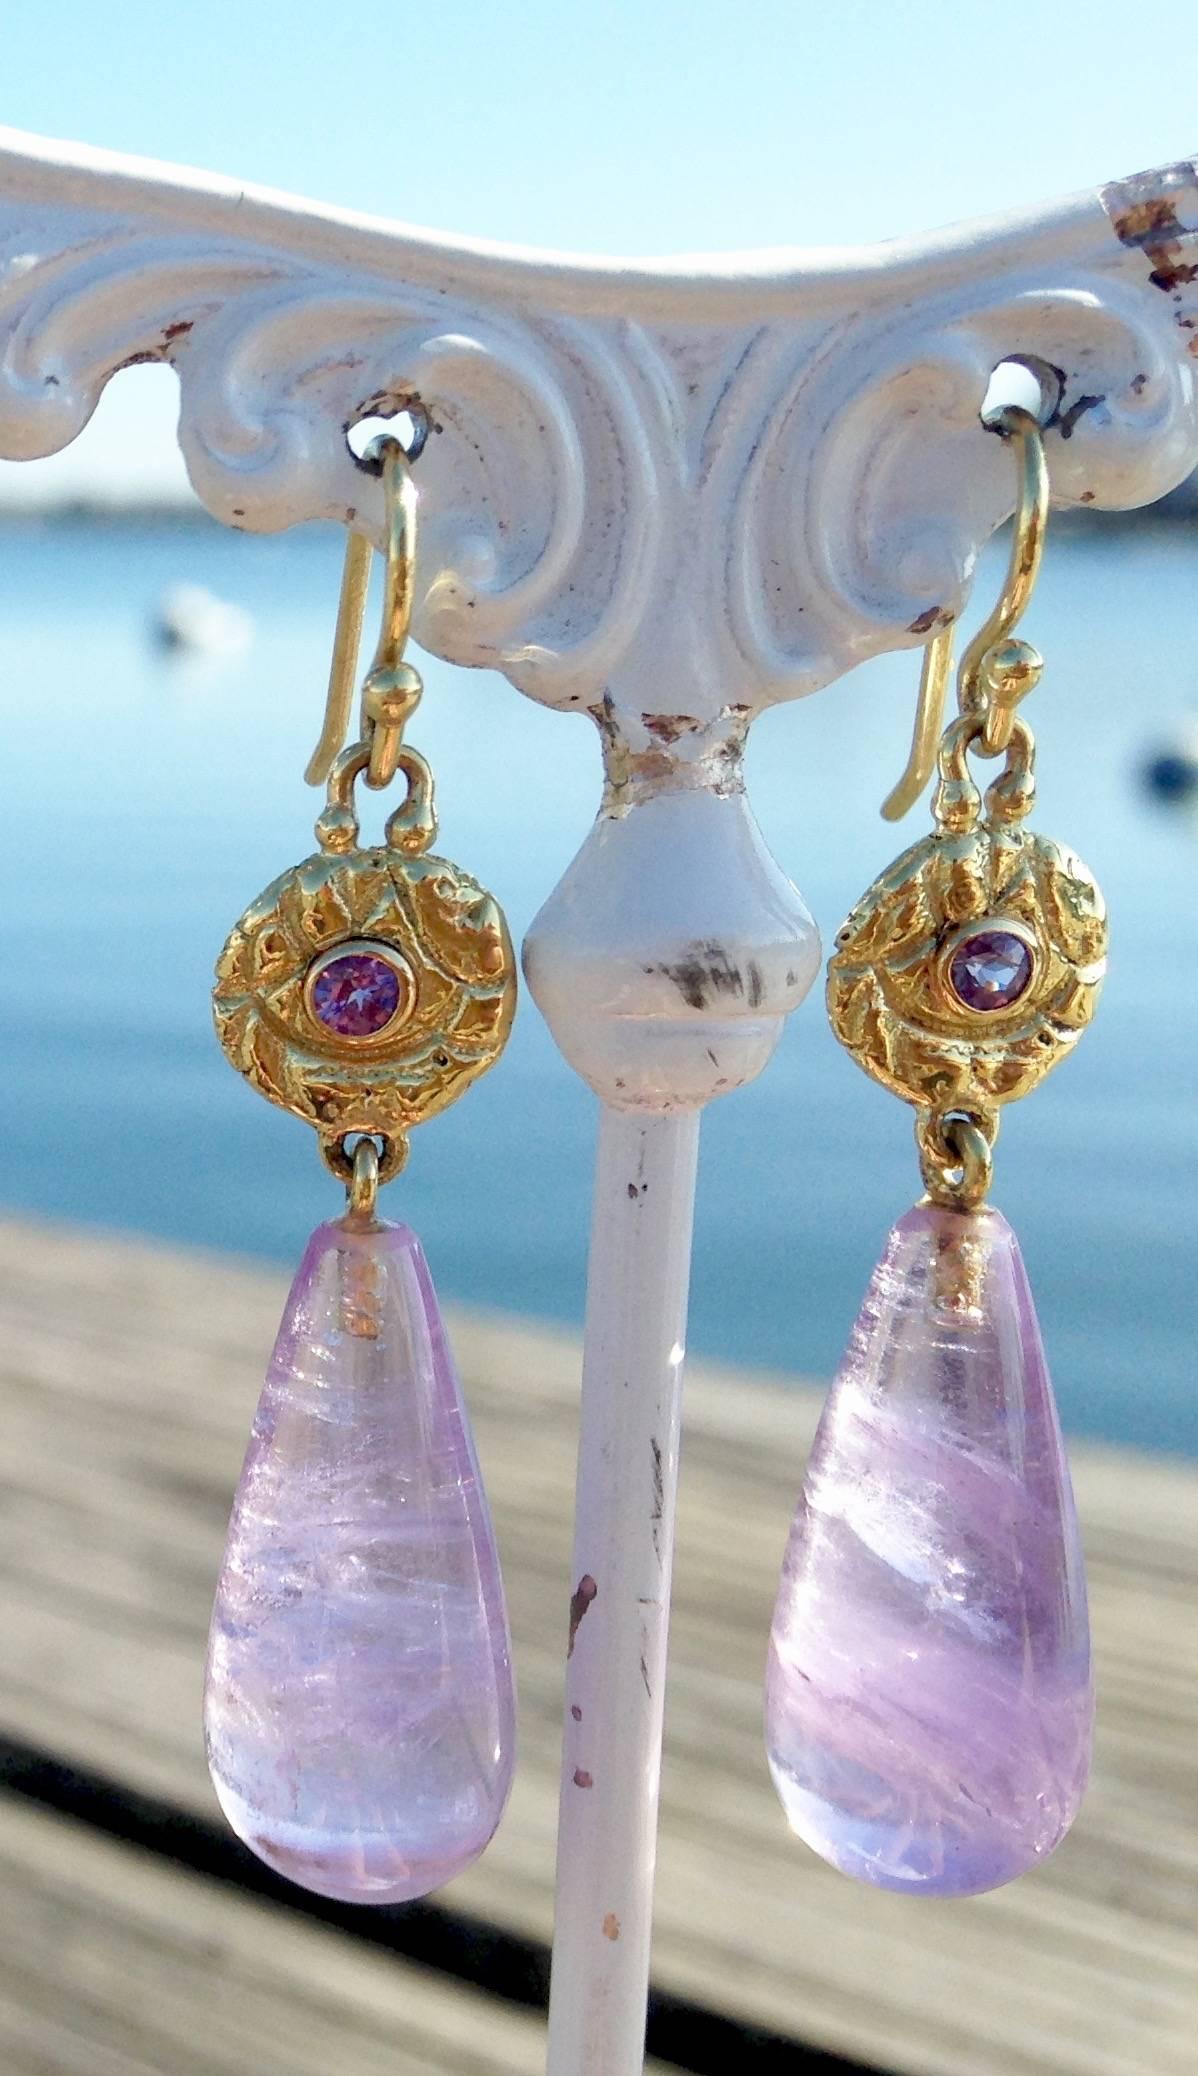 These lovely earrings are made of Lilac Sapphires set in 18kt textured Gold Discs with 25.5ct Amethysts drops.  